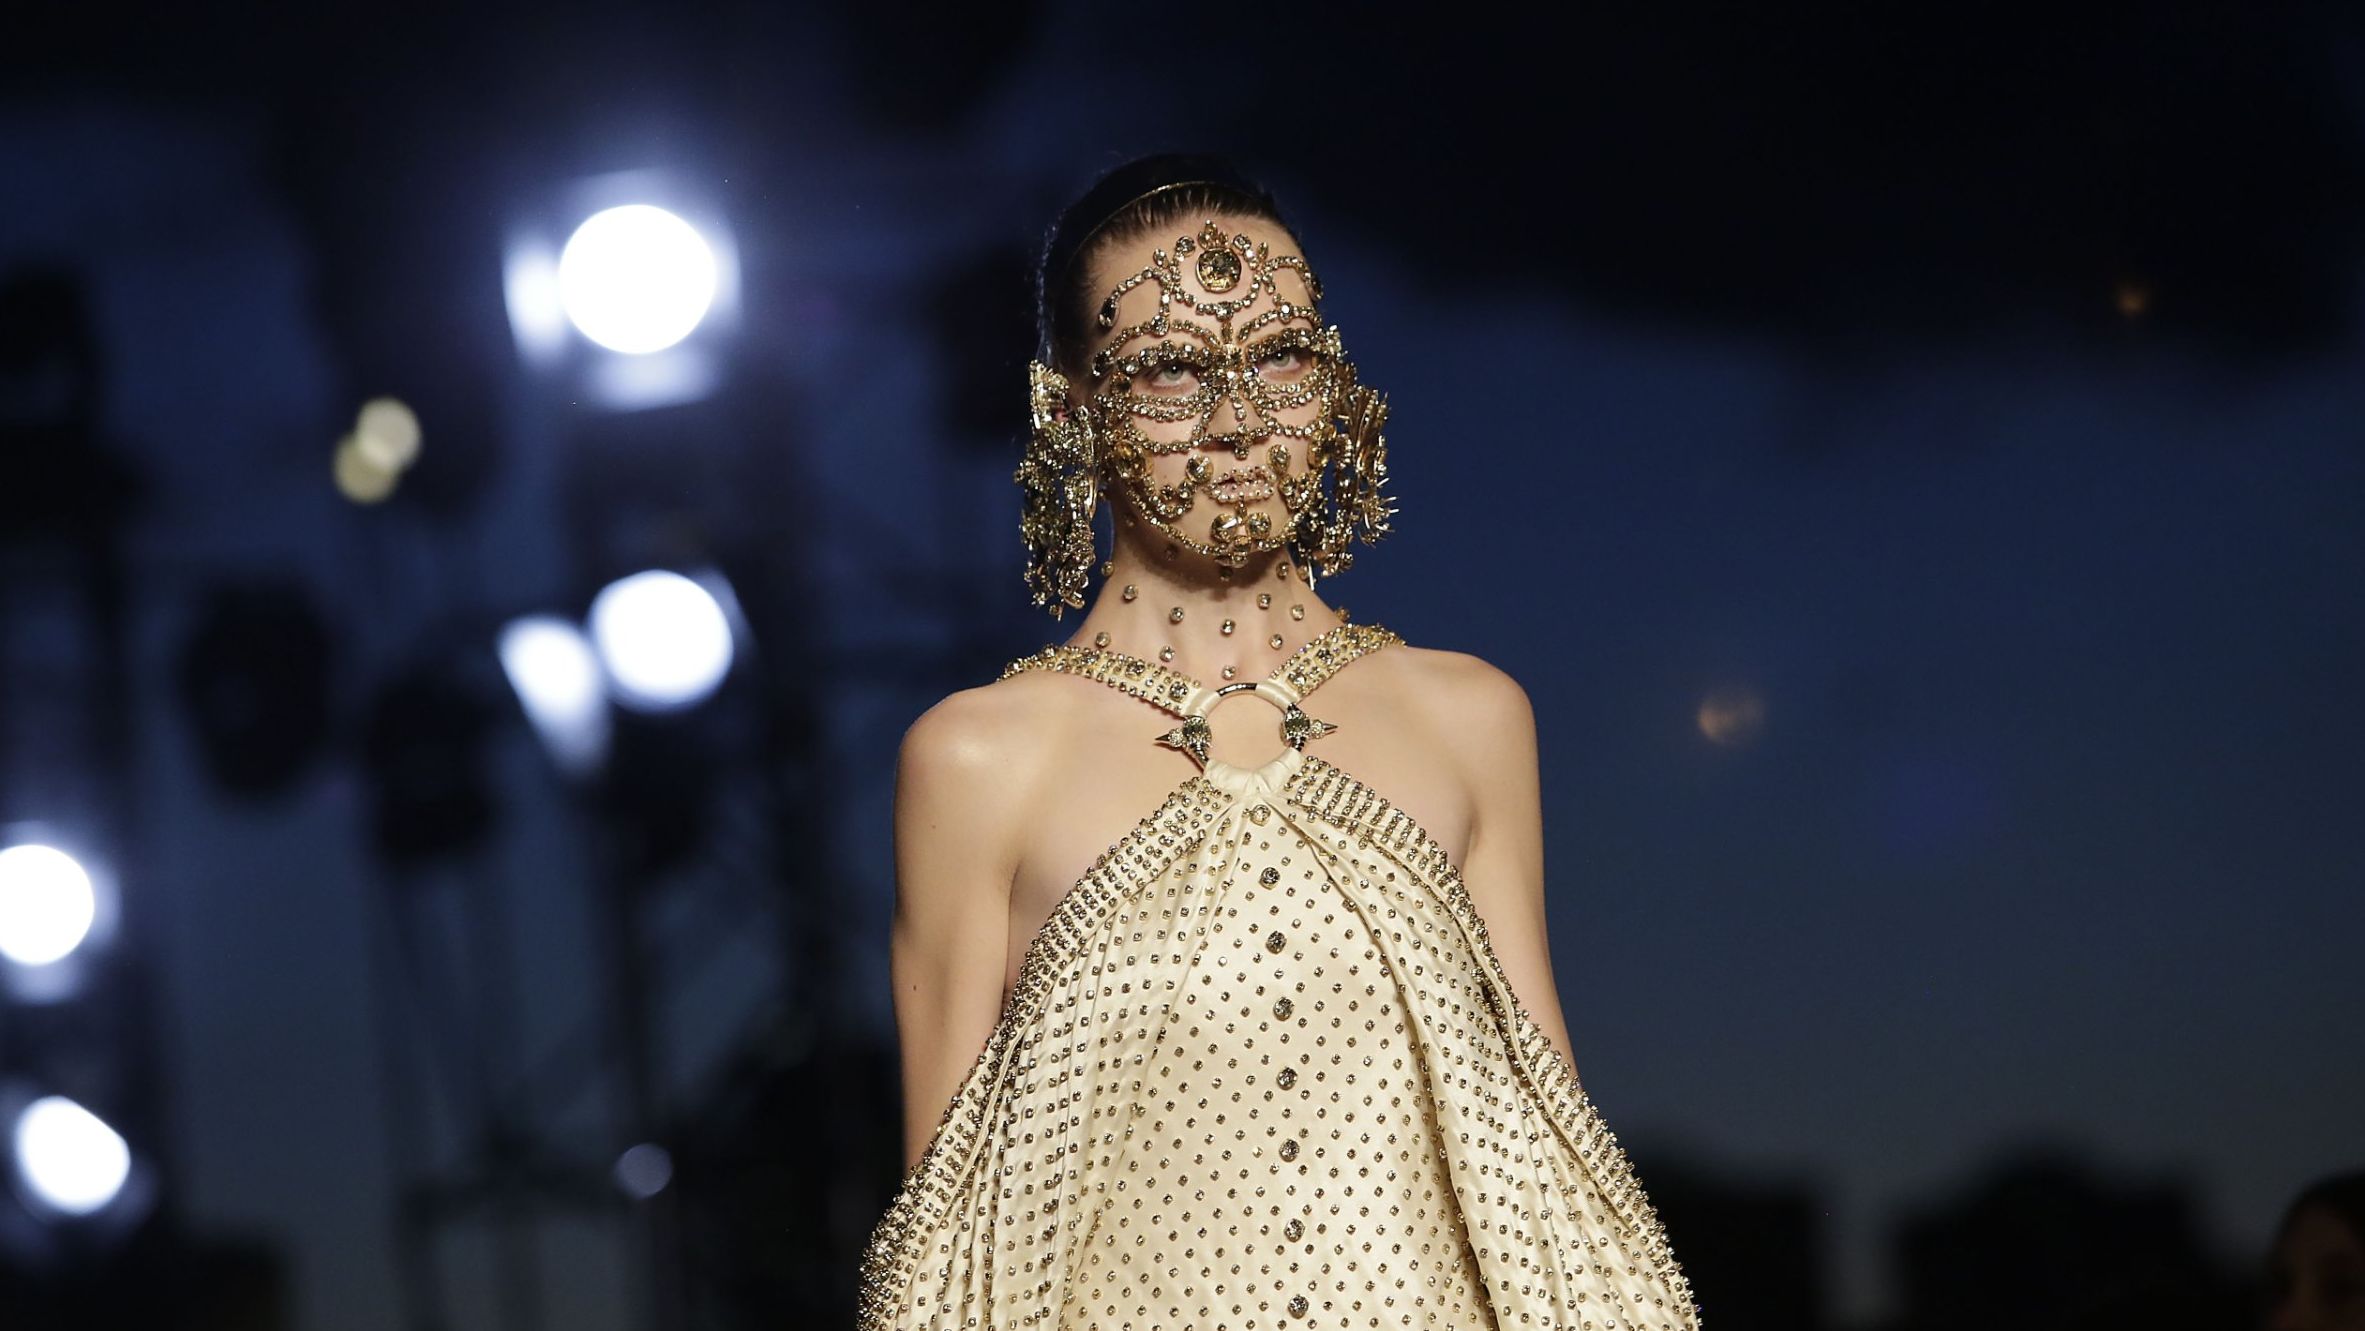 Scenes from Givenchy's New York Fashion Week SS16 show | CNN